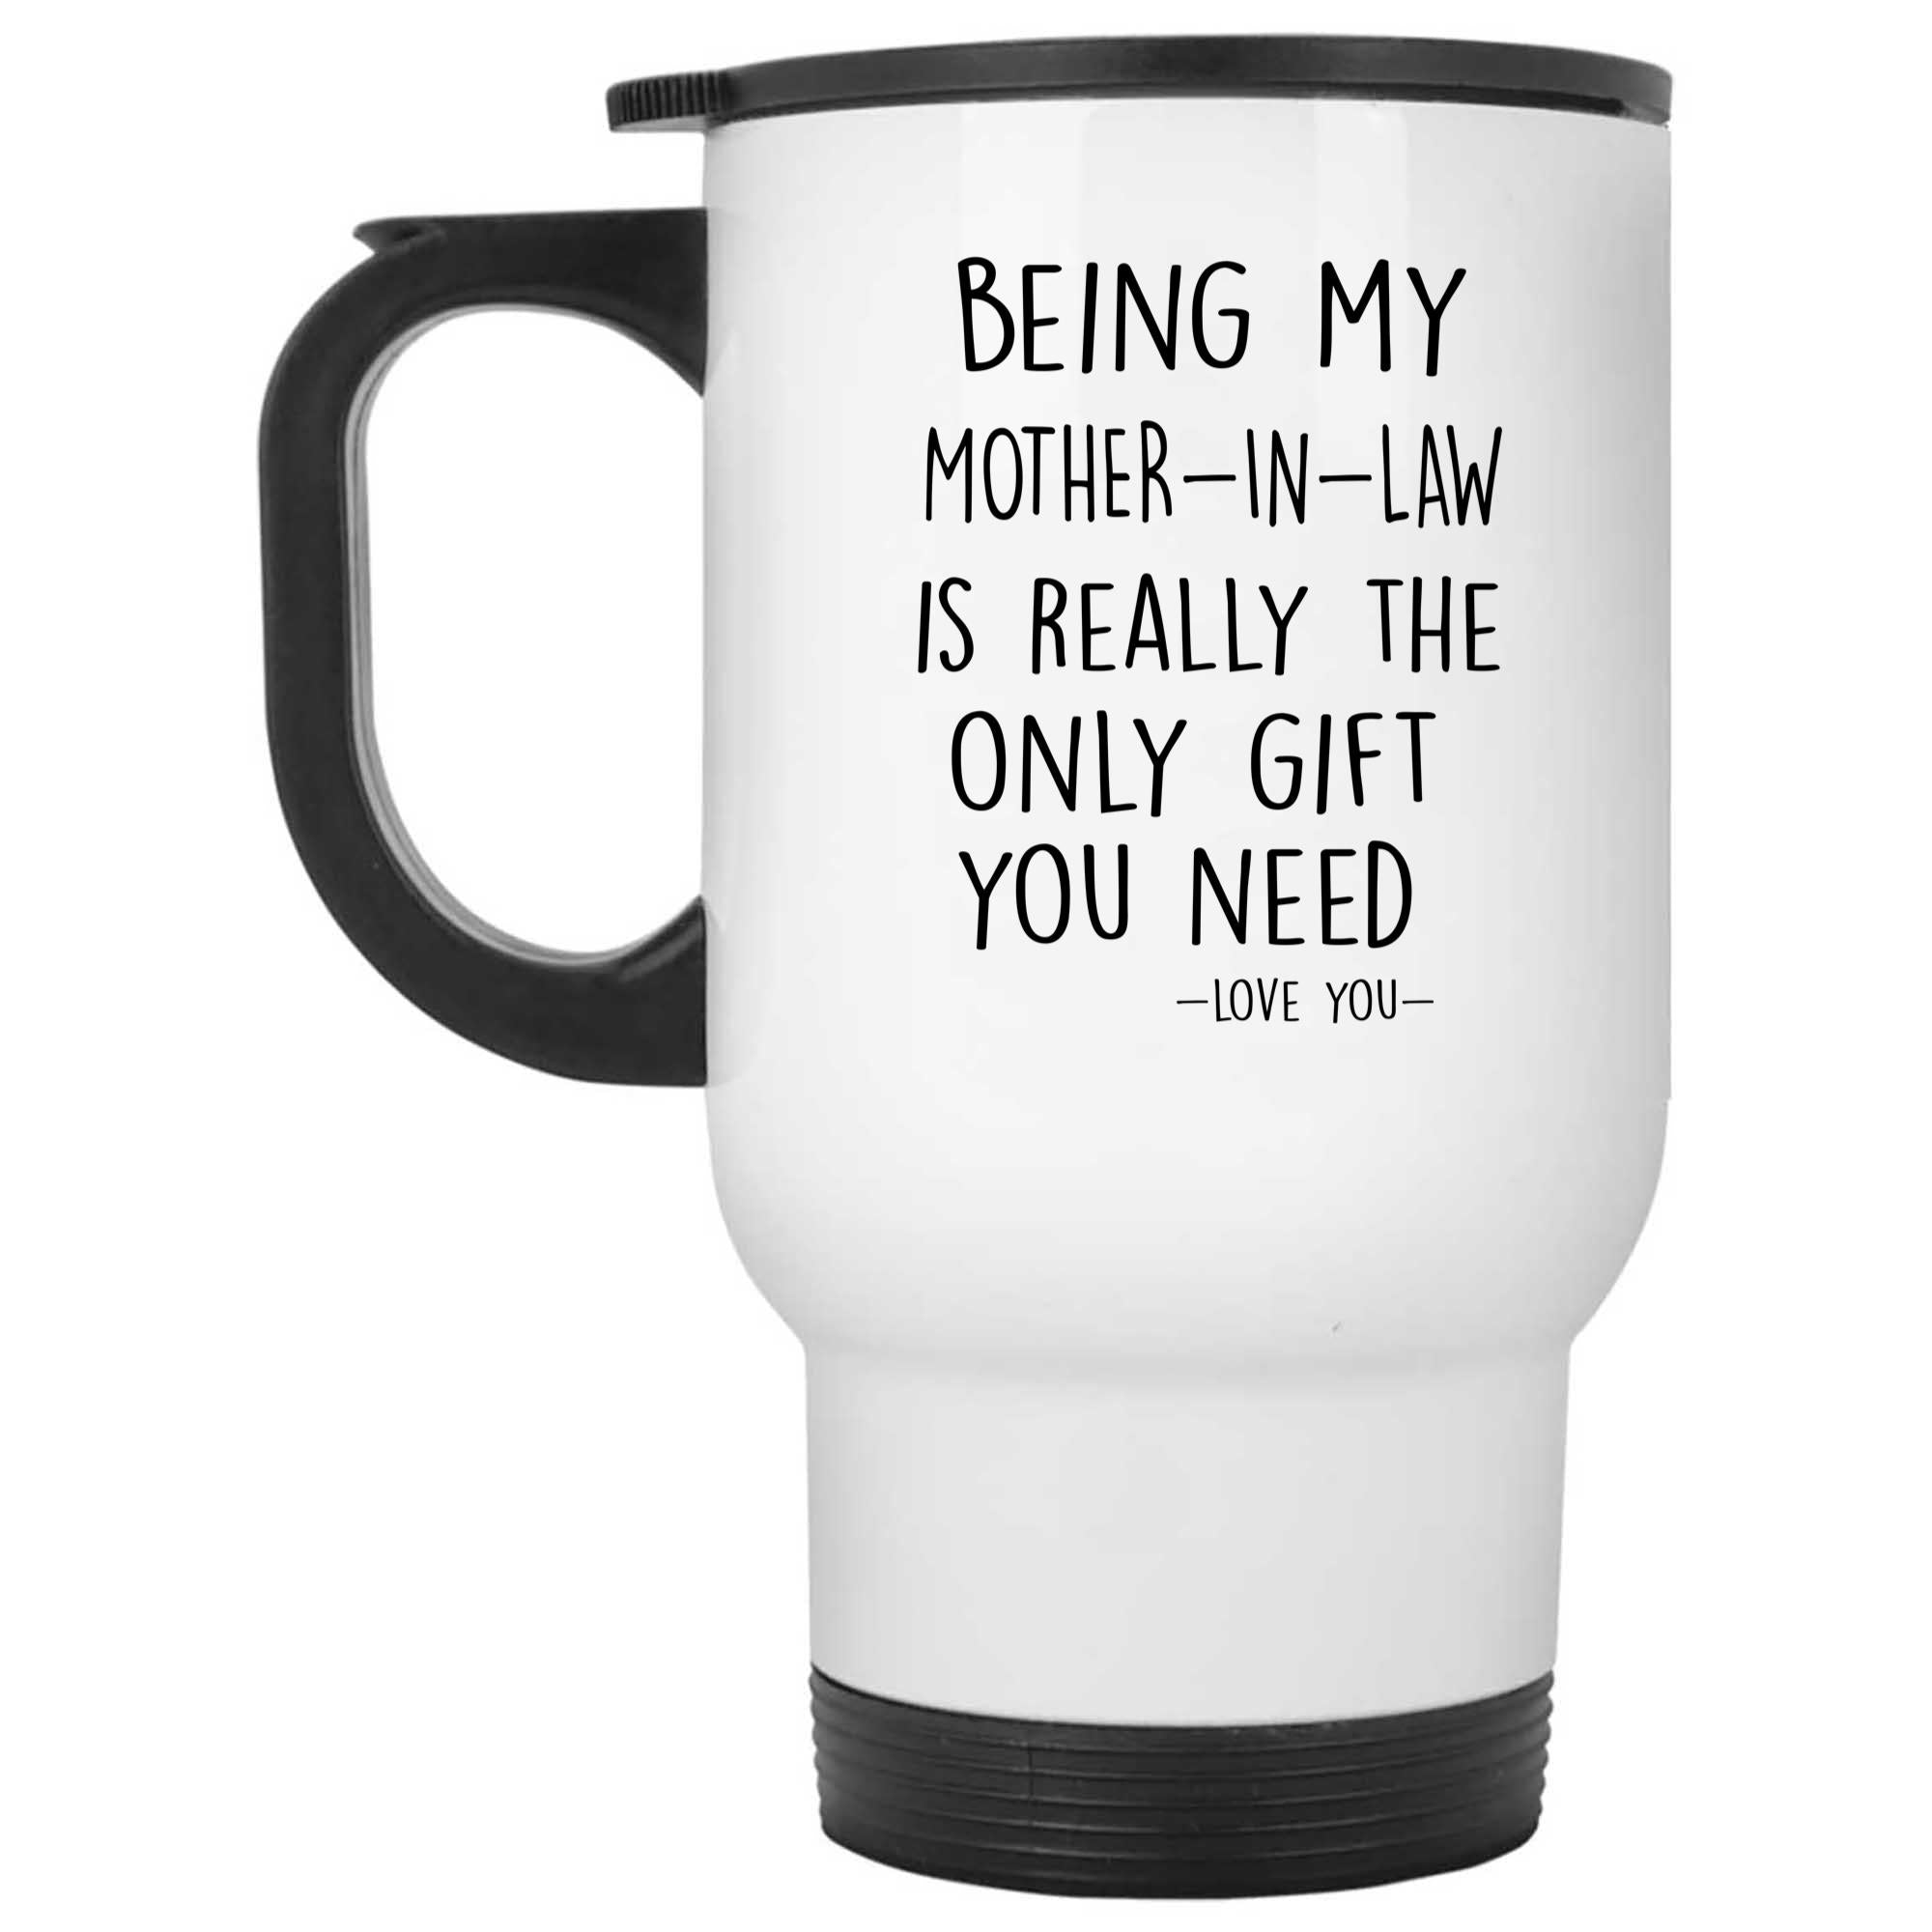 Skitongifts Funny Ceramic Novelty Coffee Mug Being My Mother-In-Law Is Really The Only Gift You Need - Love You Mother-In-Law Funny Gift eMXdWB1